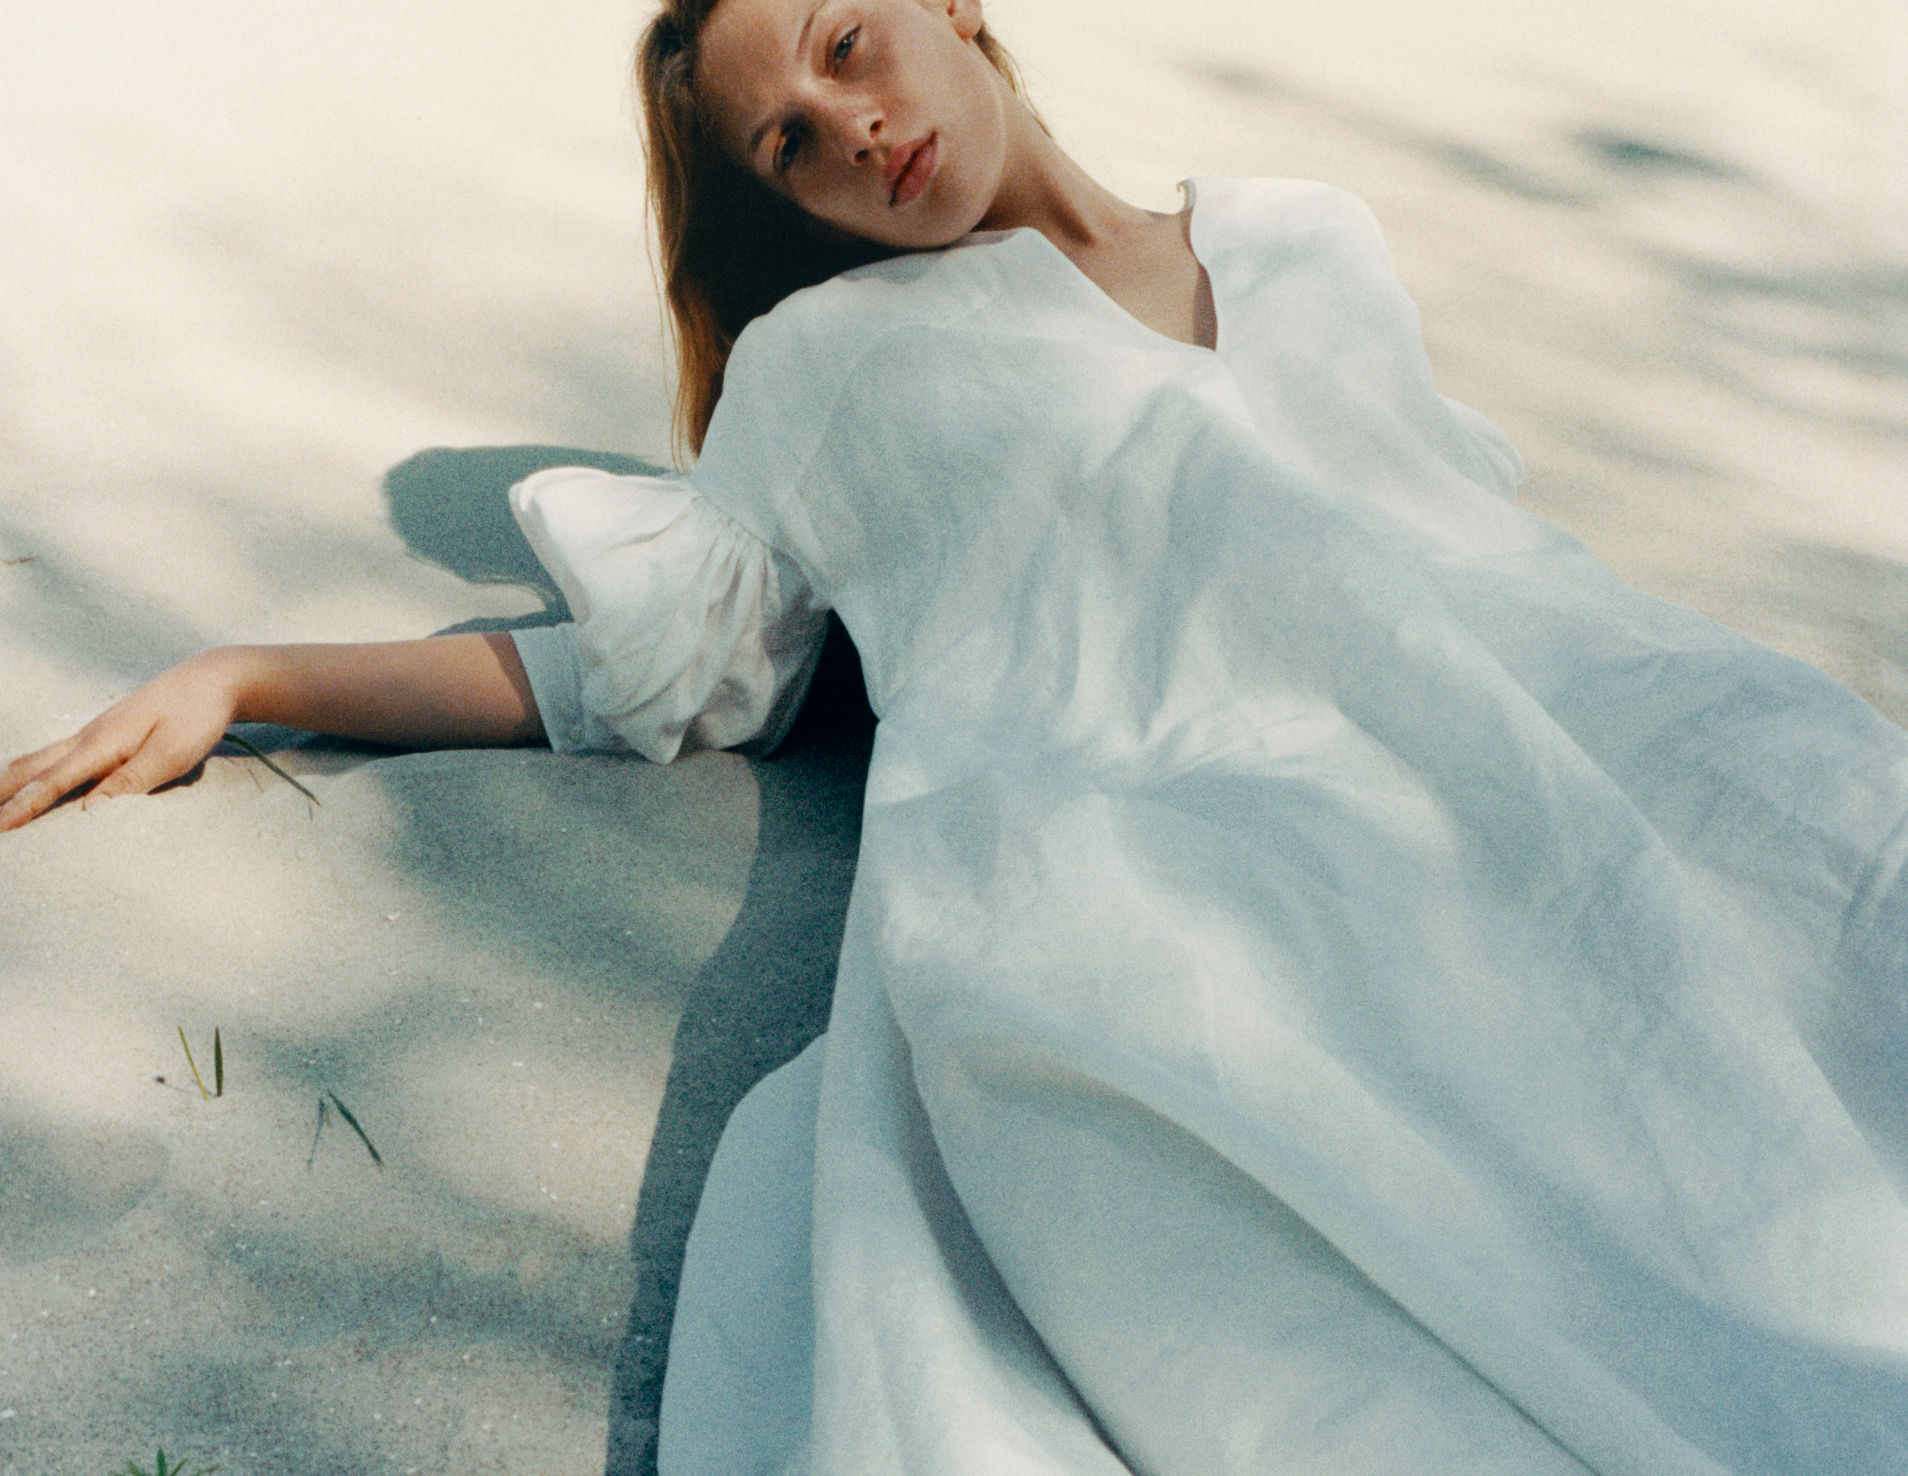 Jil Sander unveils a nature-inspired summer capsule collection